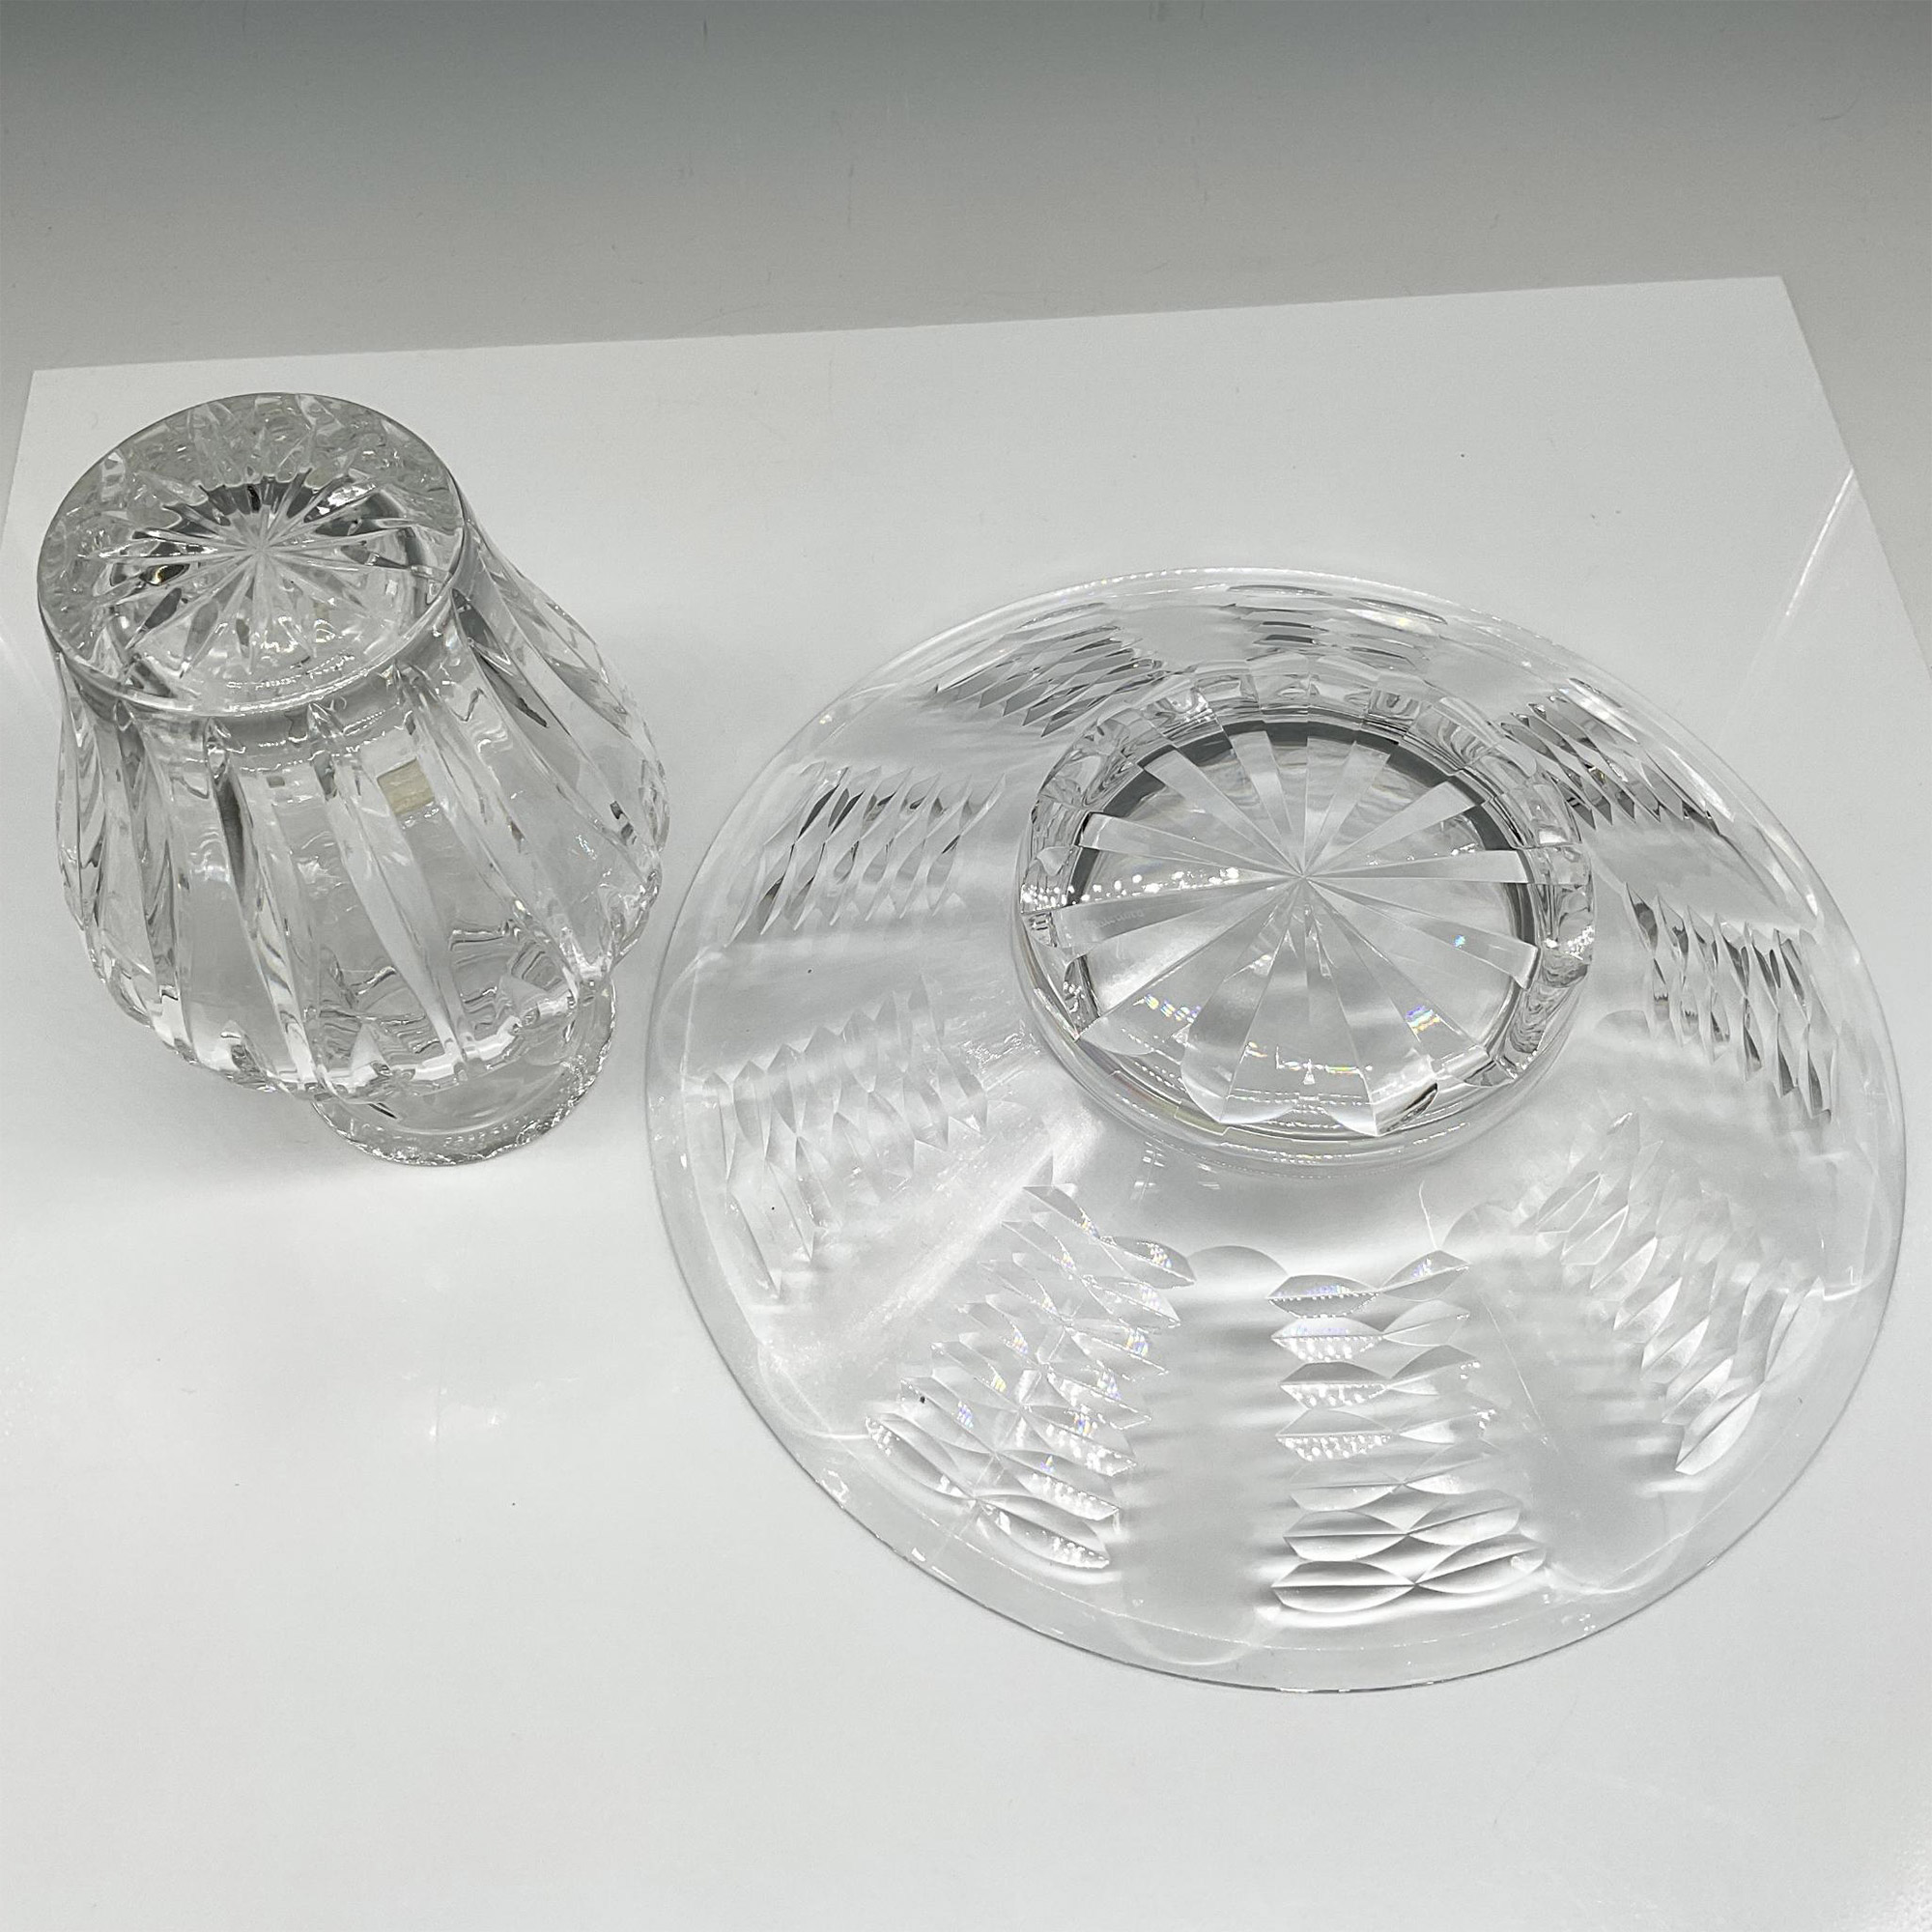 2pc Waterford Crystal Centerpiece Bowl & Vase - Image 3 of 3